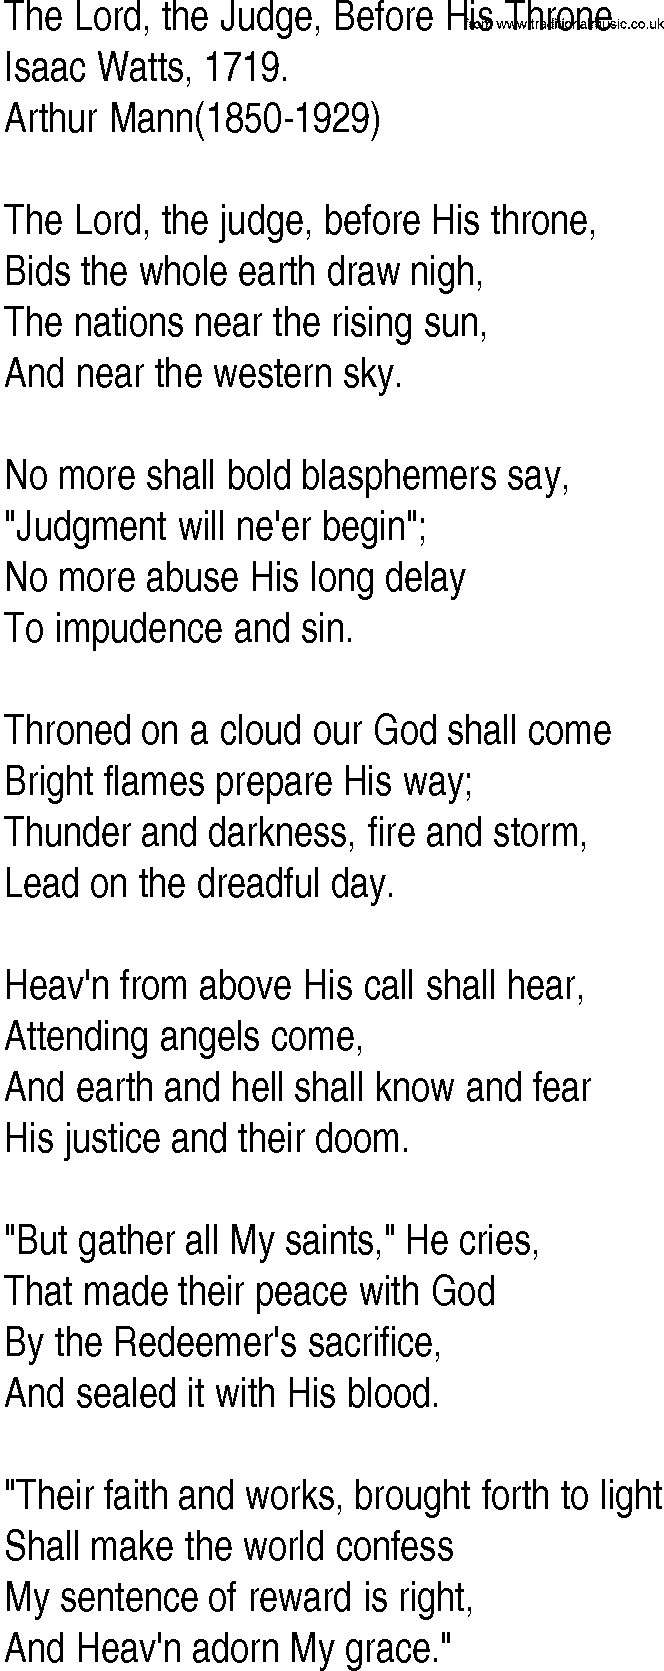 Hymn and Gospel Song: The Lord, the Judge, Before His Throne by Isaac Watts lyrics